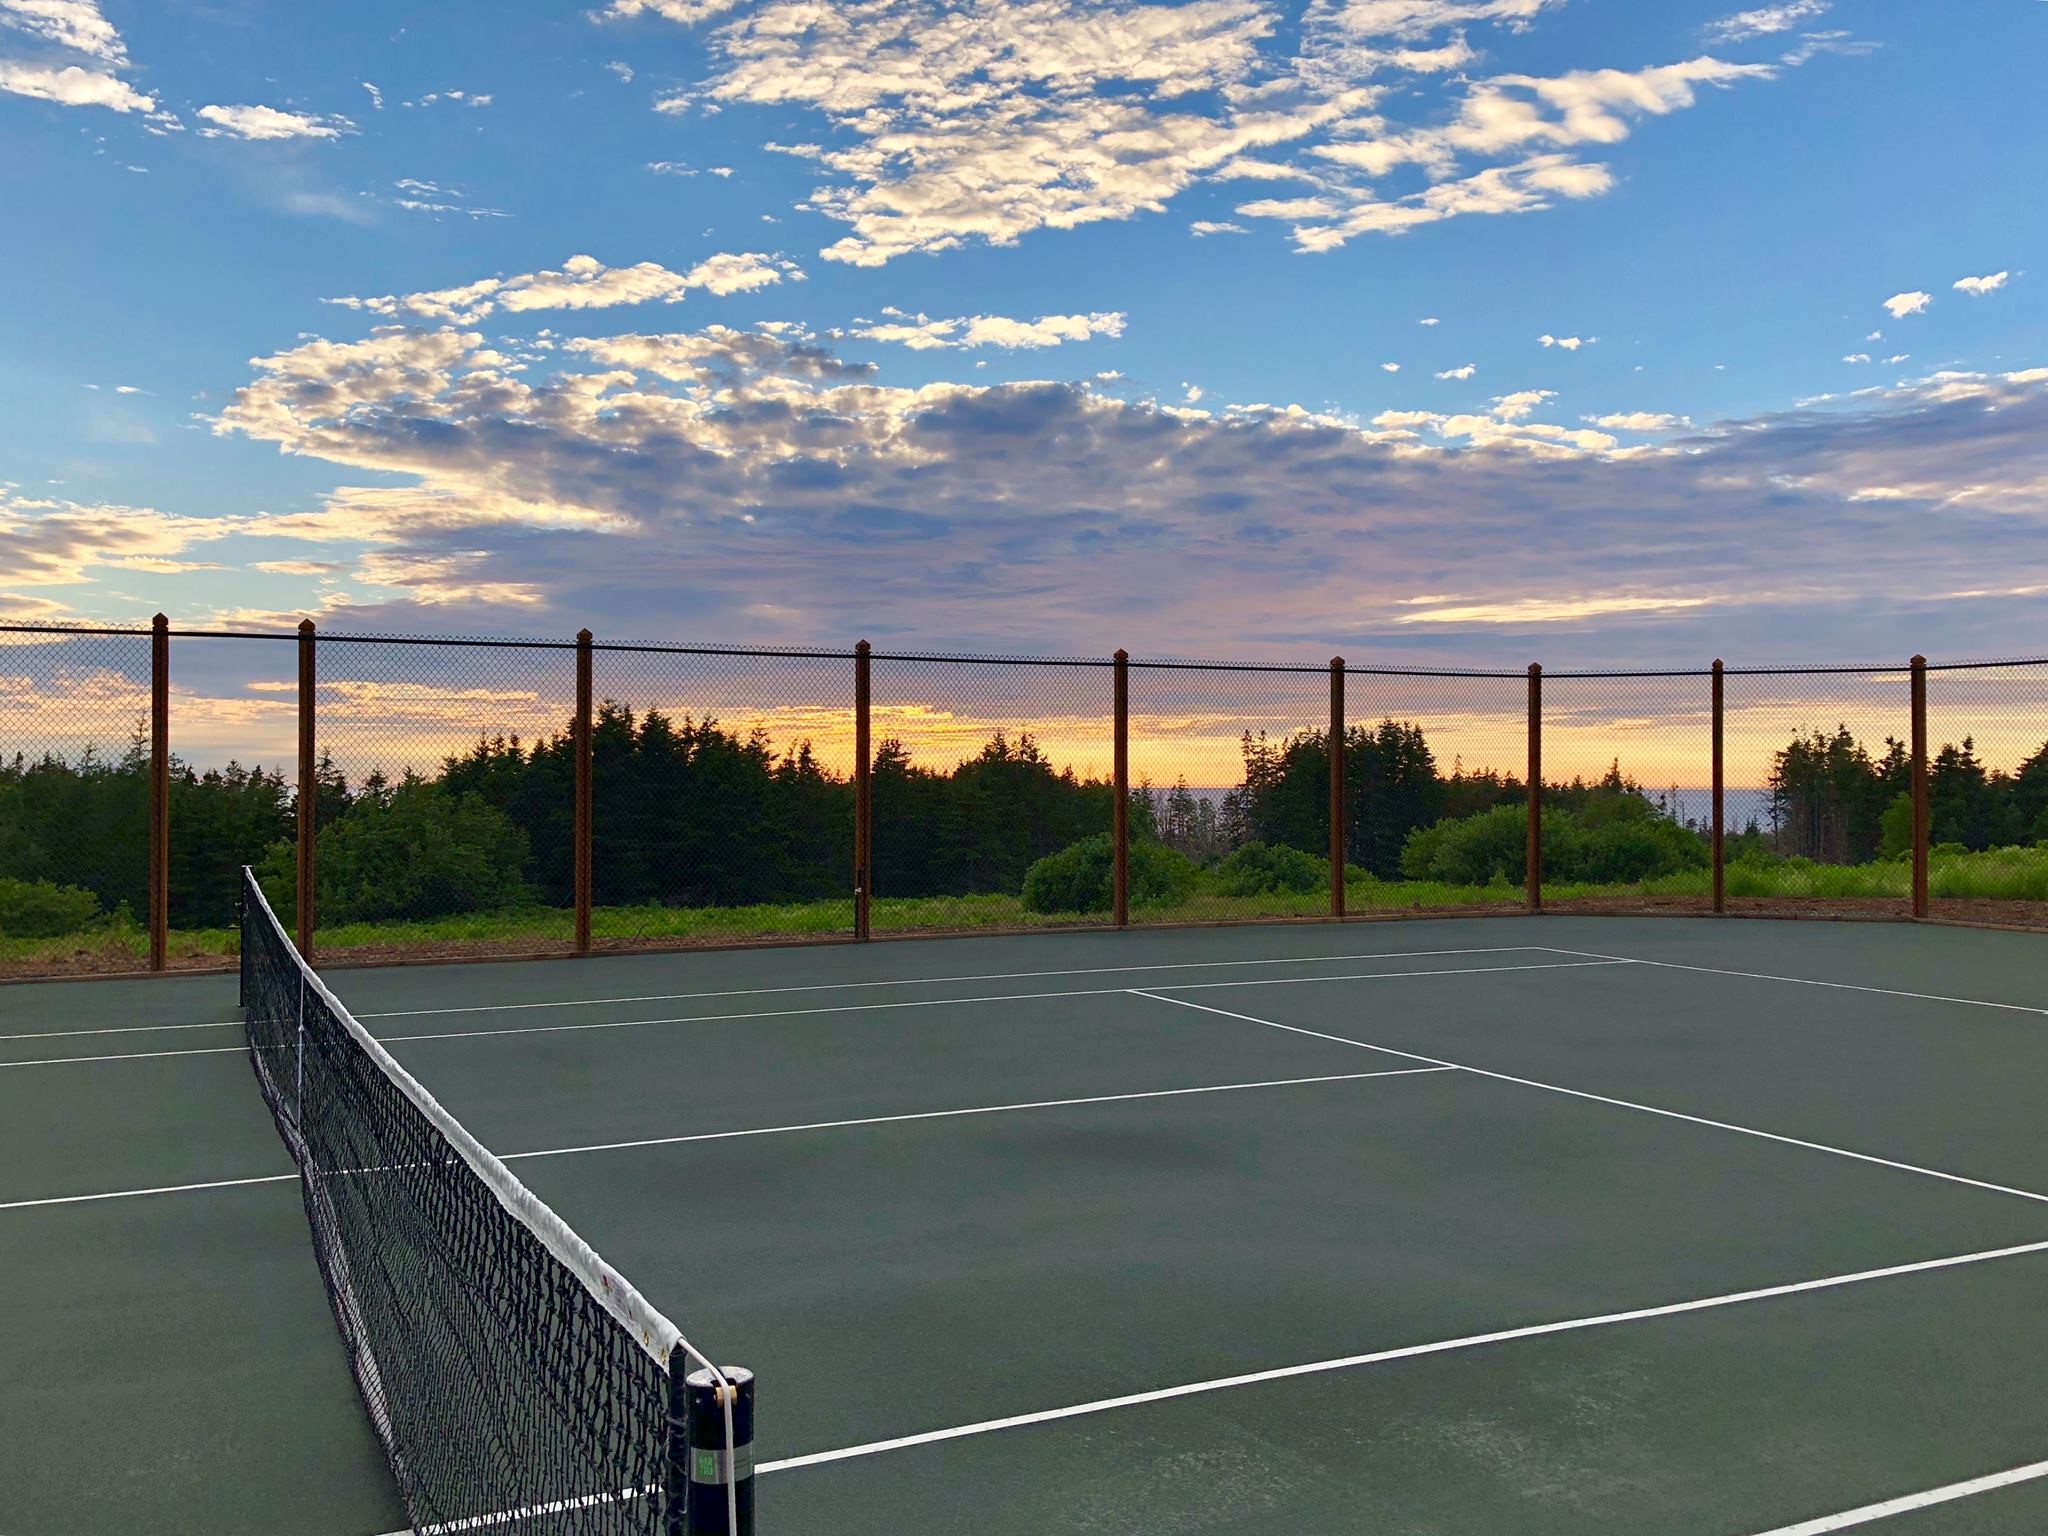 Cabot Cliffs Opens Two New Clay Tennis Courts goCapeBreton com